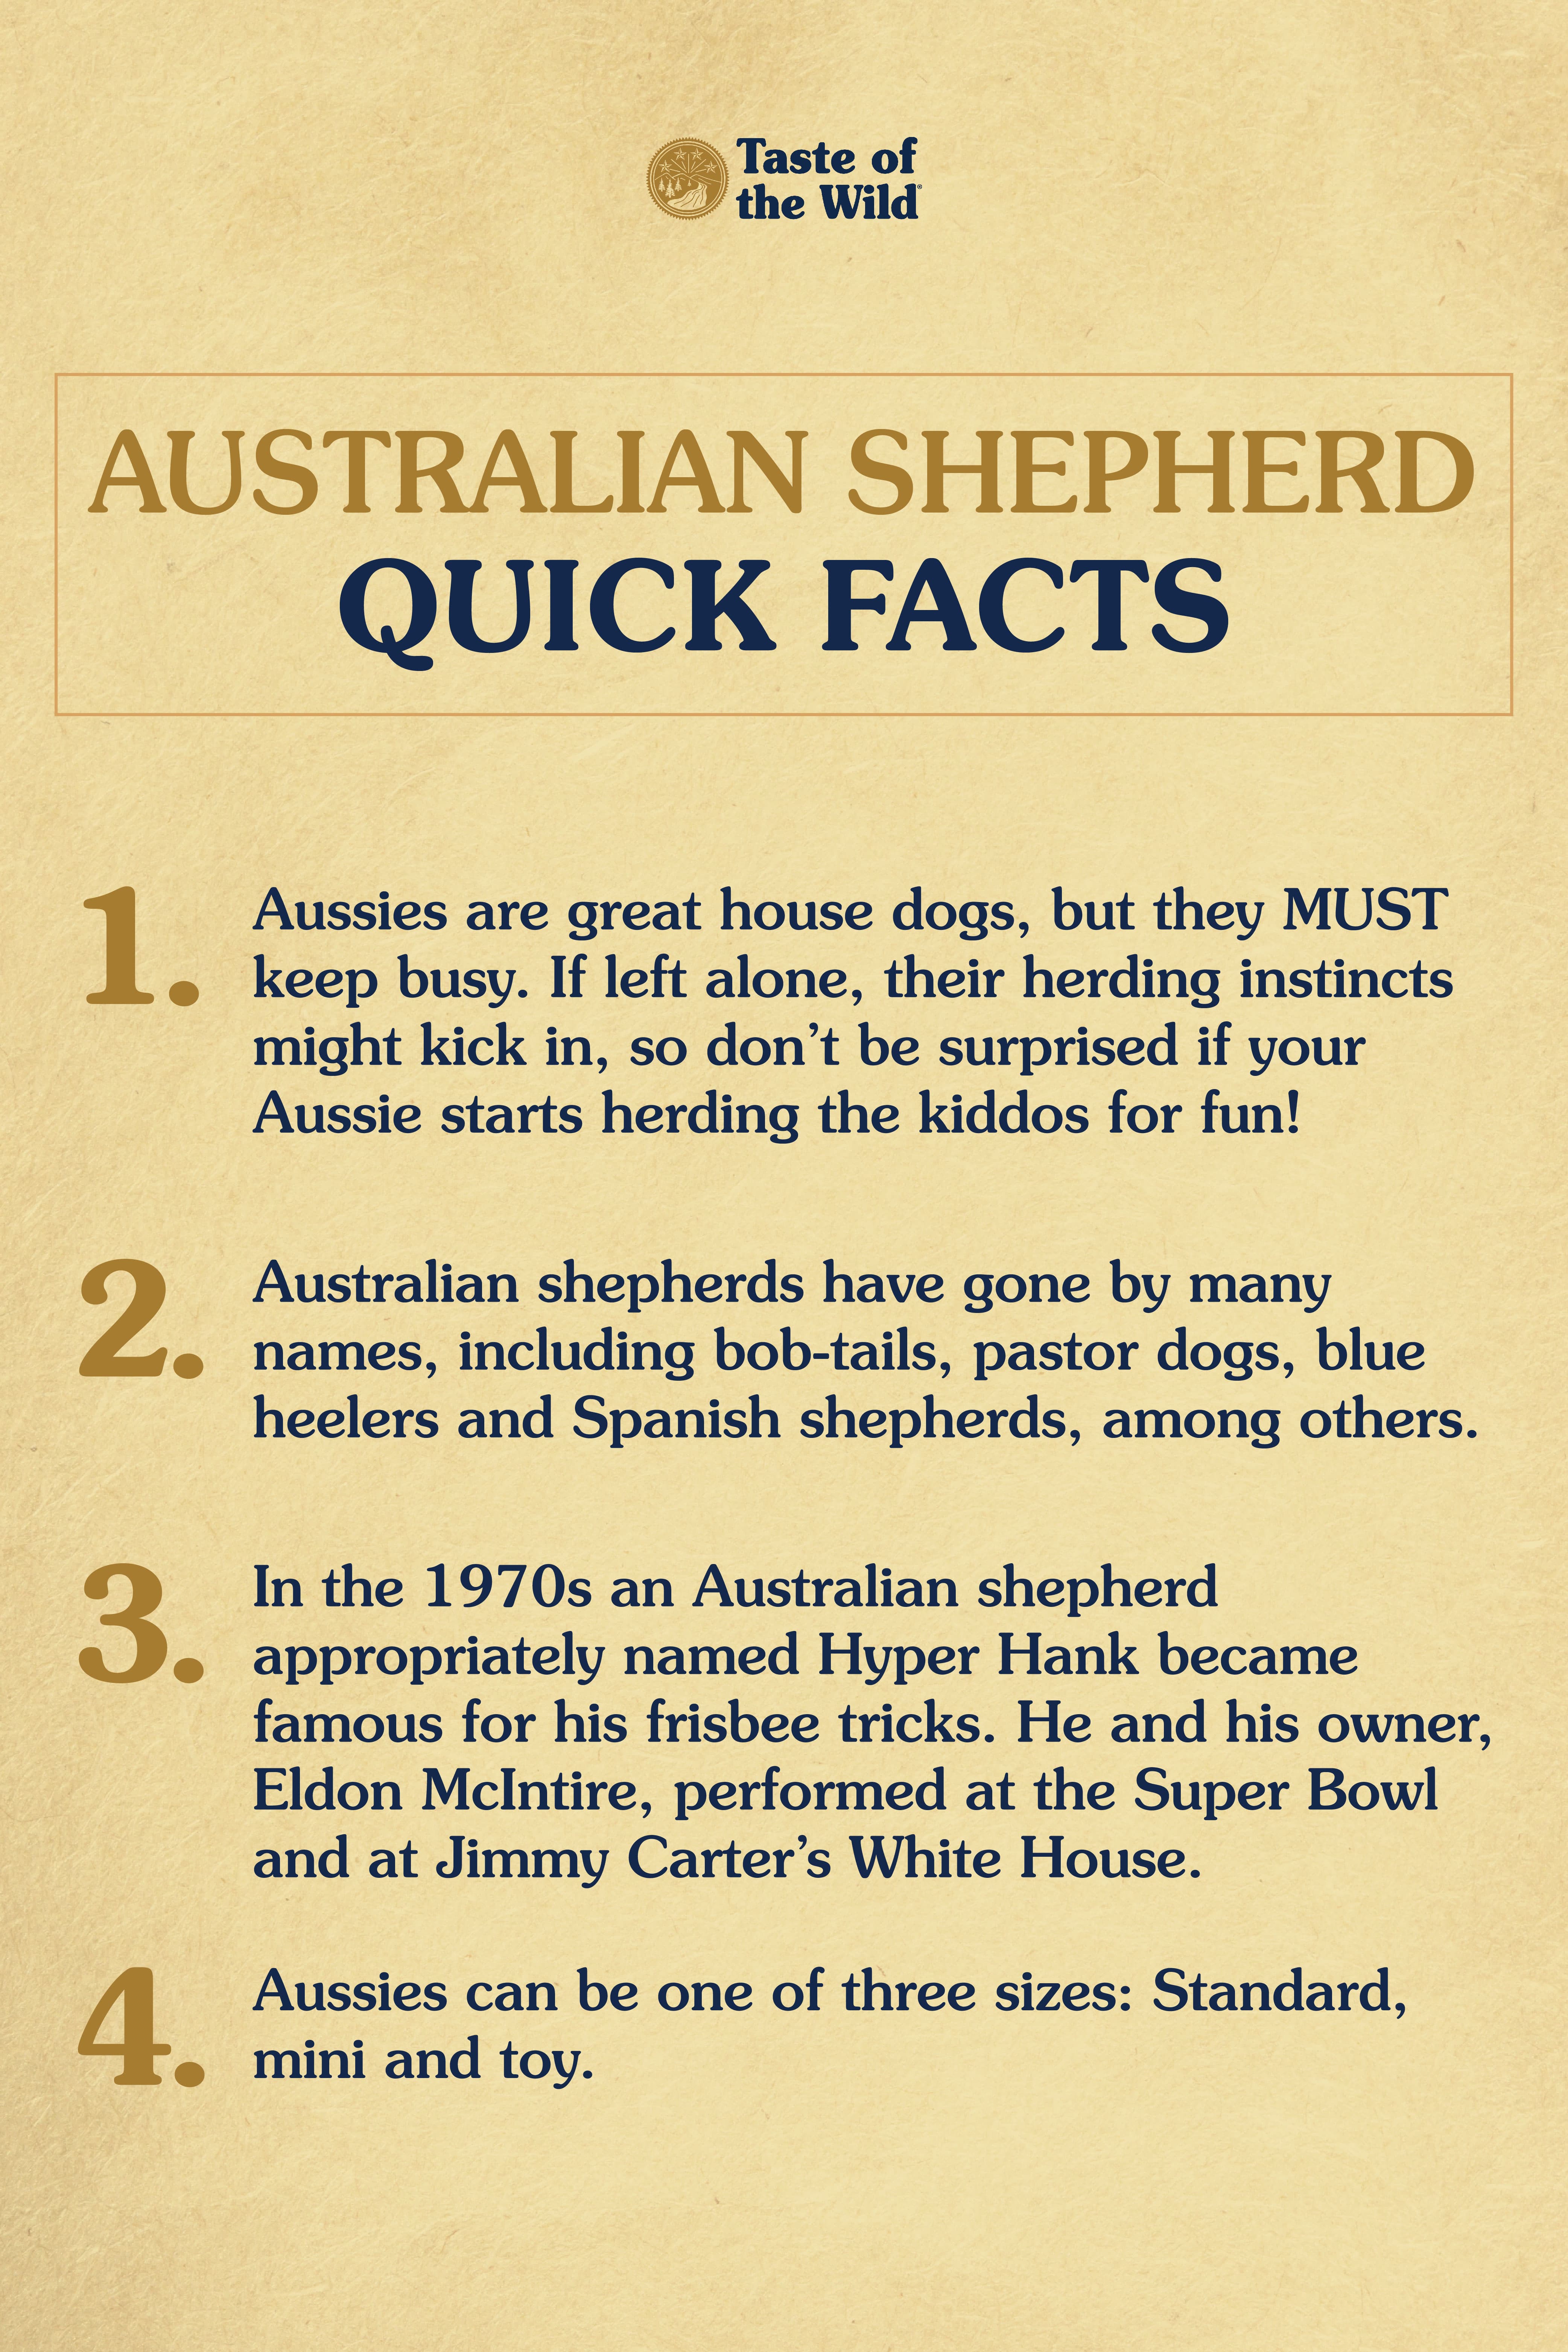 An interior graphic detailing four quick facts about Australian shepherds.